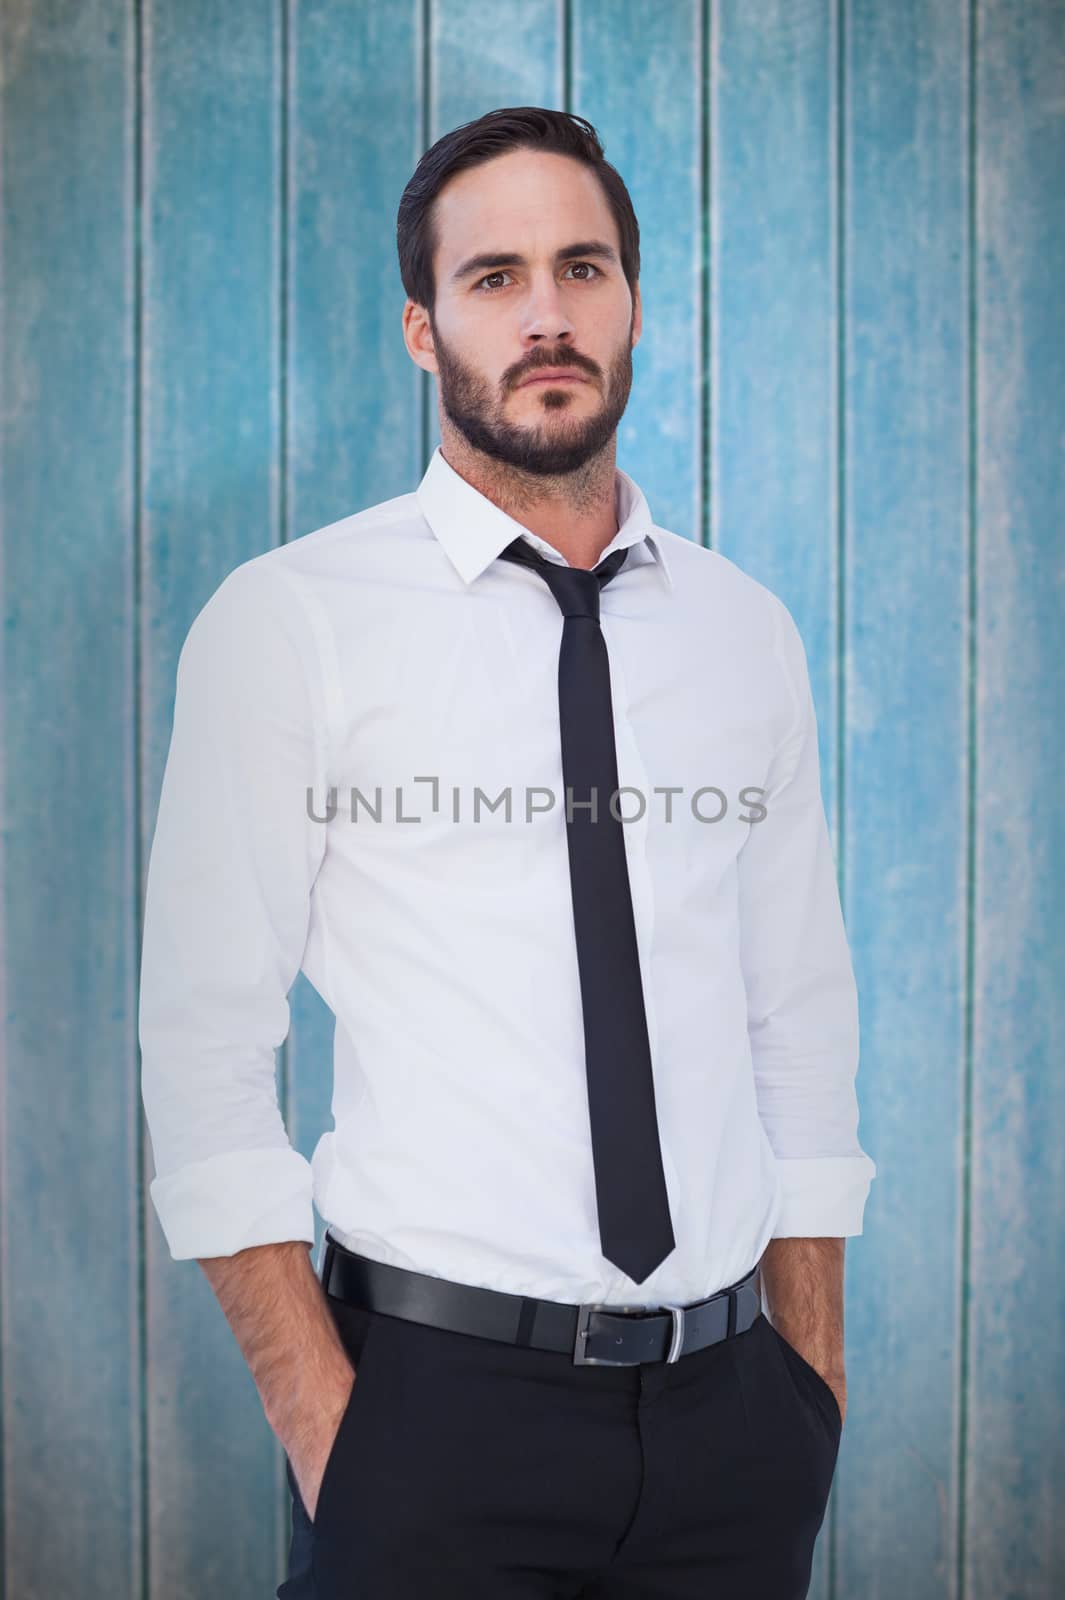 Unsmiling businessman standing with hands in pockets against wooden planks